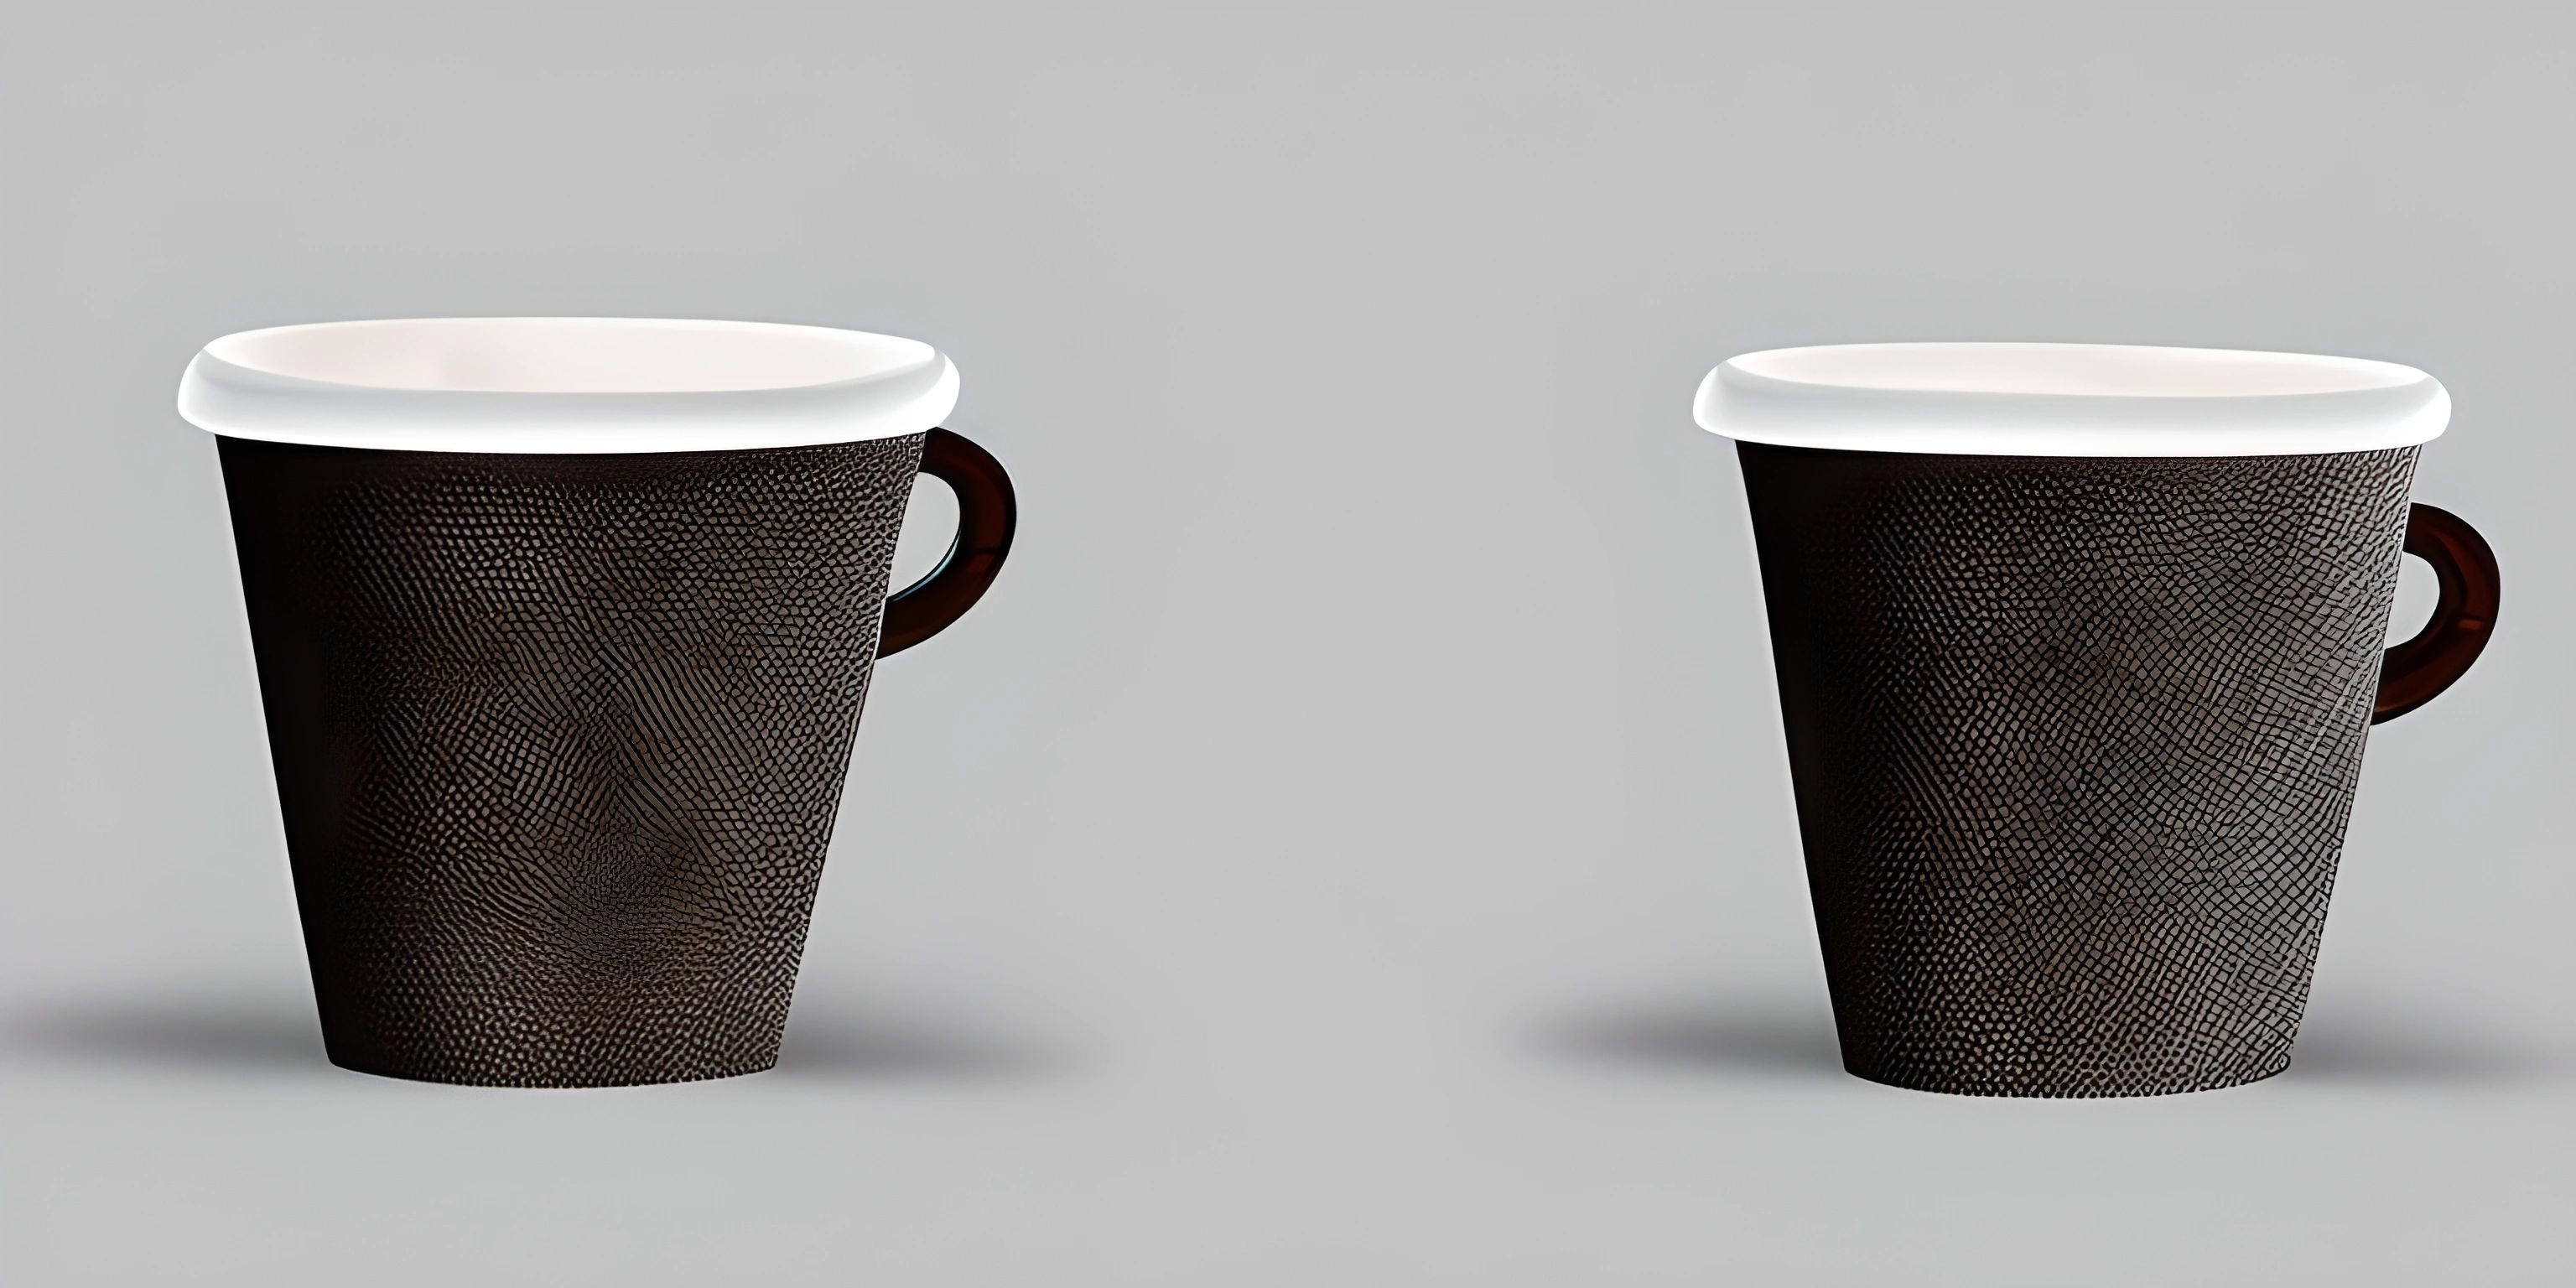 two coffee cups sit on a table together with white lids and a brown band around the sides